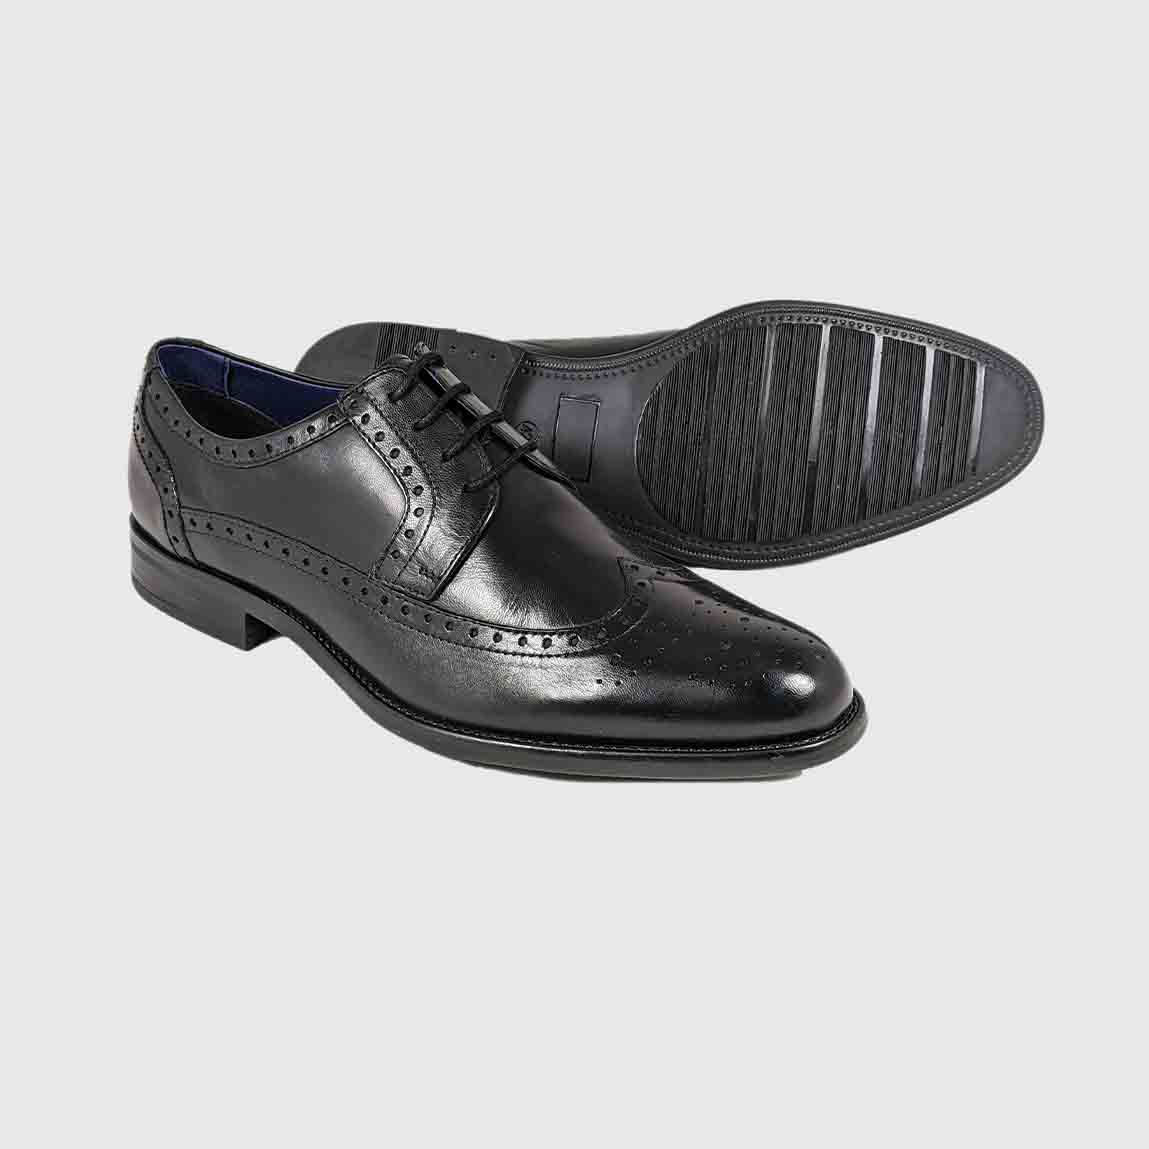 Frontal pair view of the Dubarry Dyson Black Formal Dress Shoes.